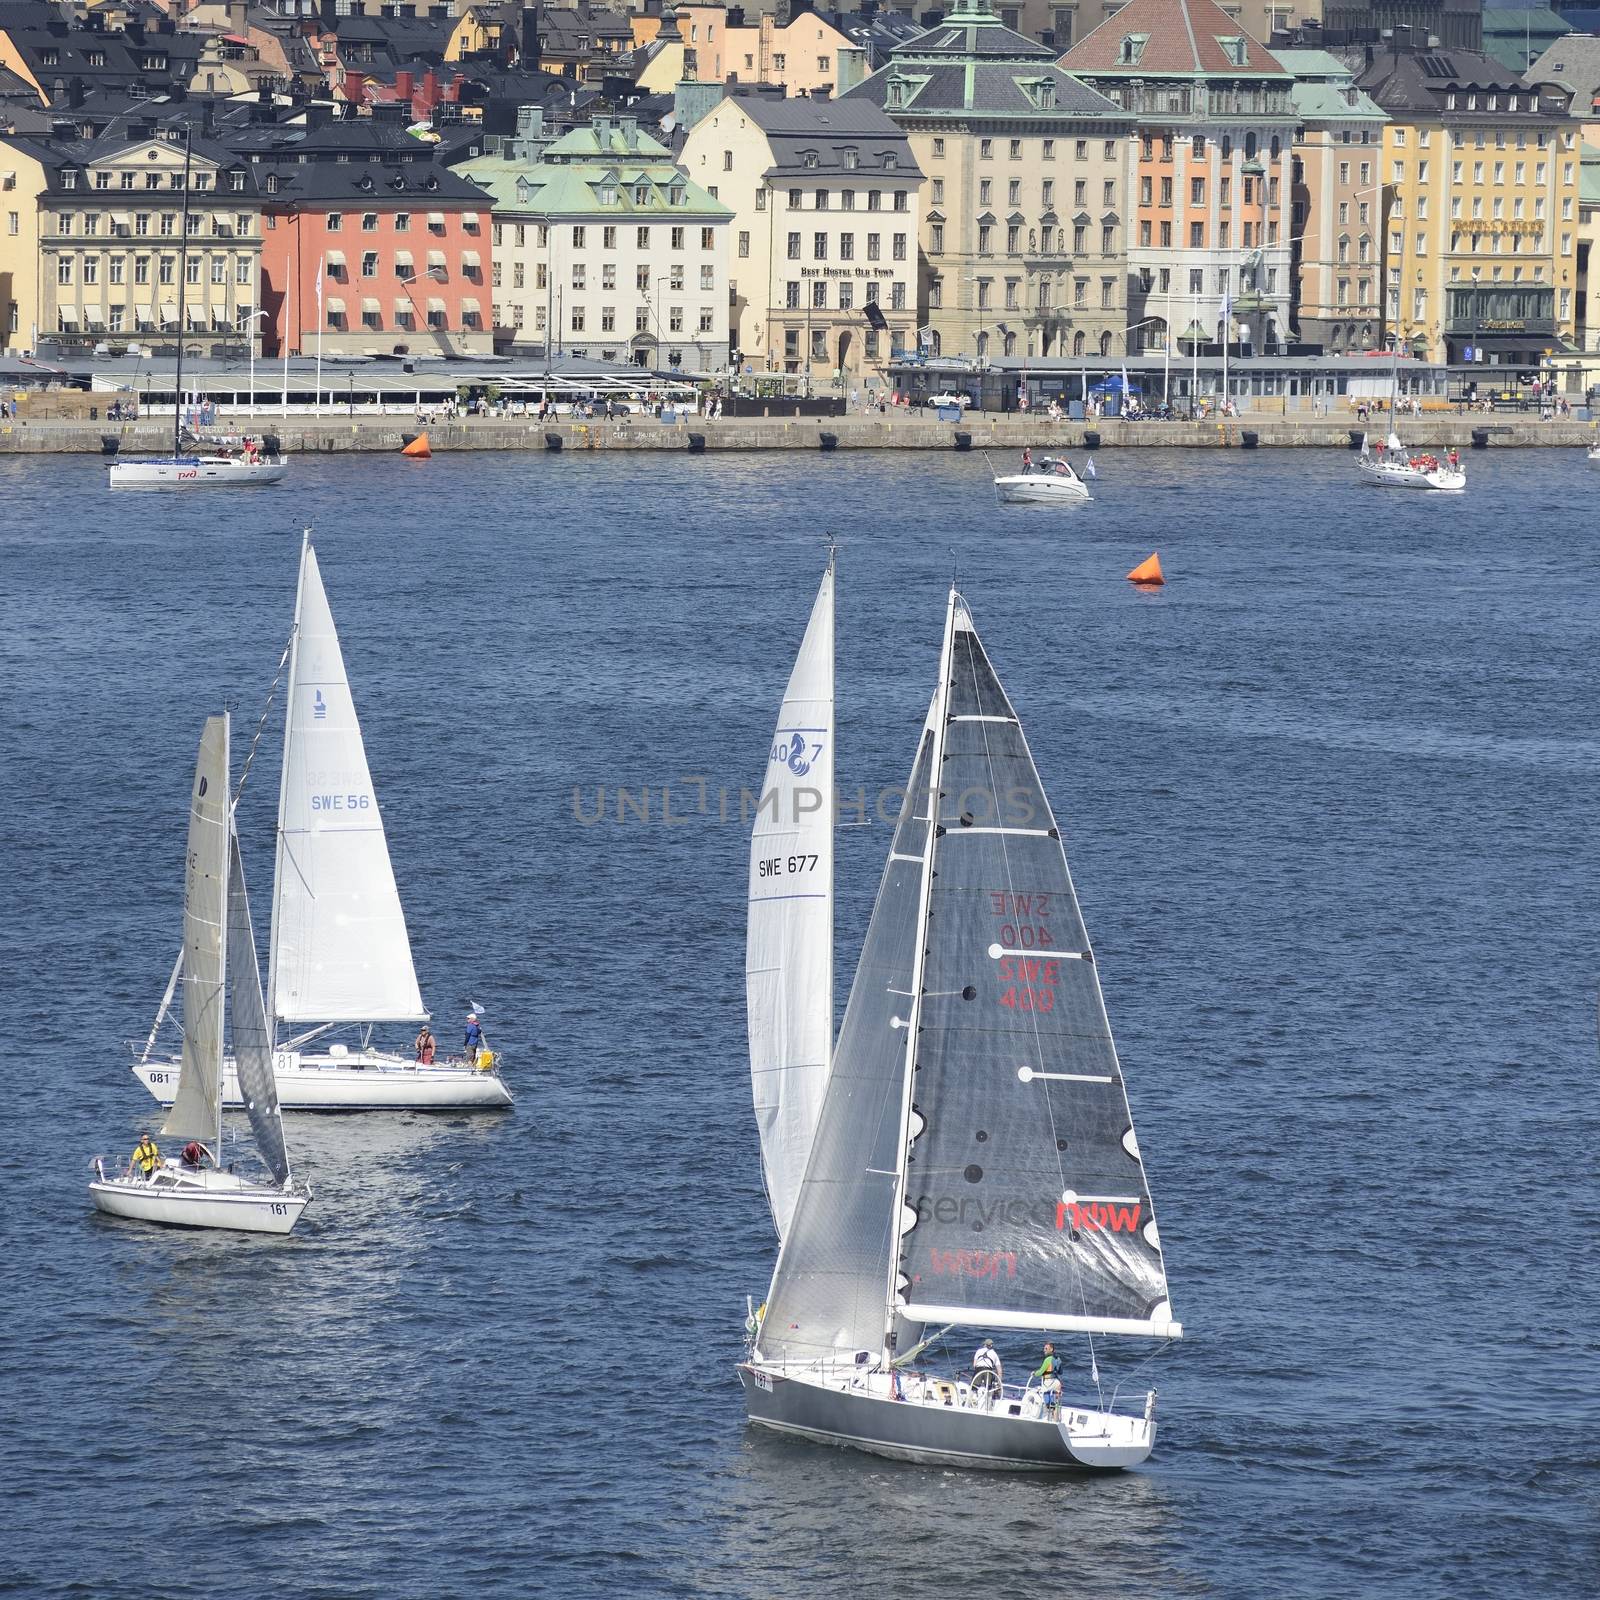 Stockholm embankment with boats by a40757